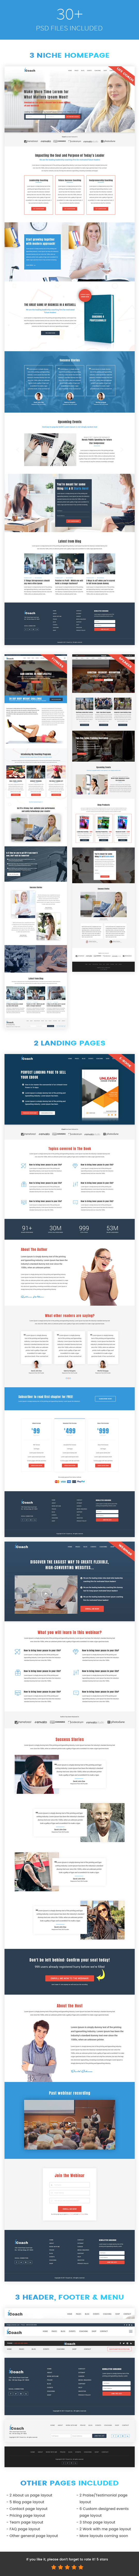 iCoach - For Coaches, Speakers, Fitness Trainers & Entrepreneurs PSD Template - 2